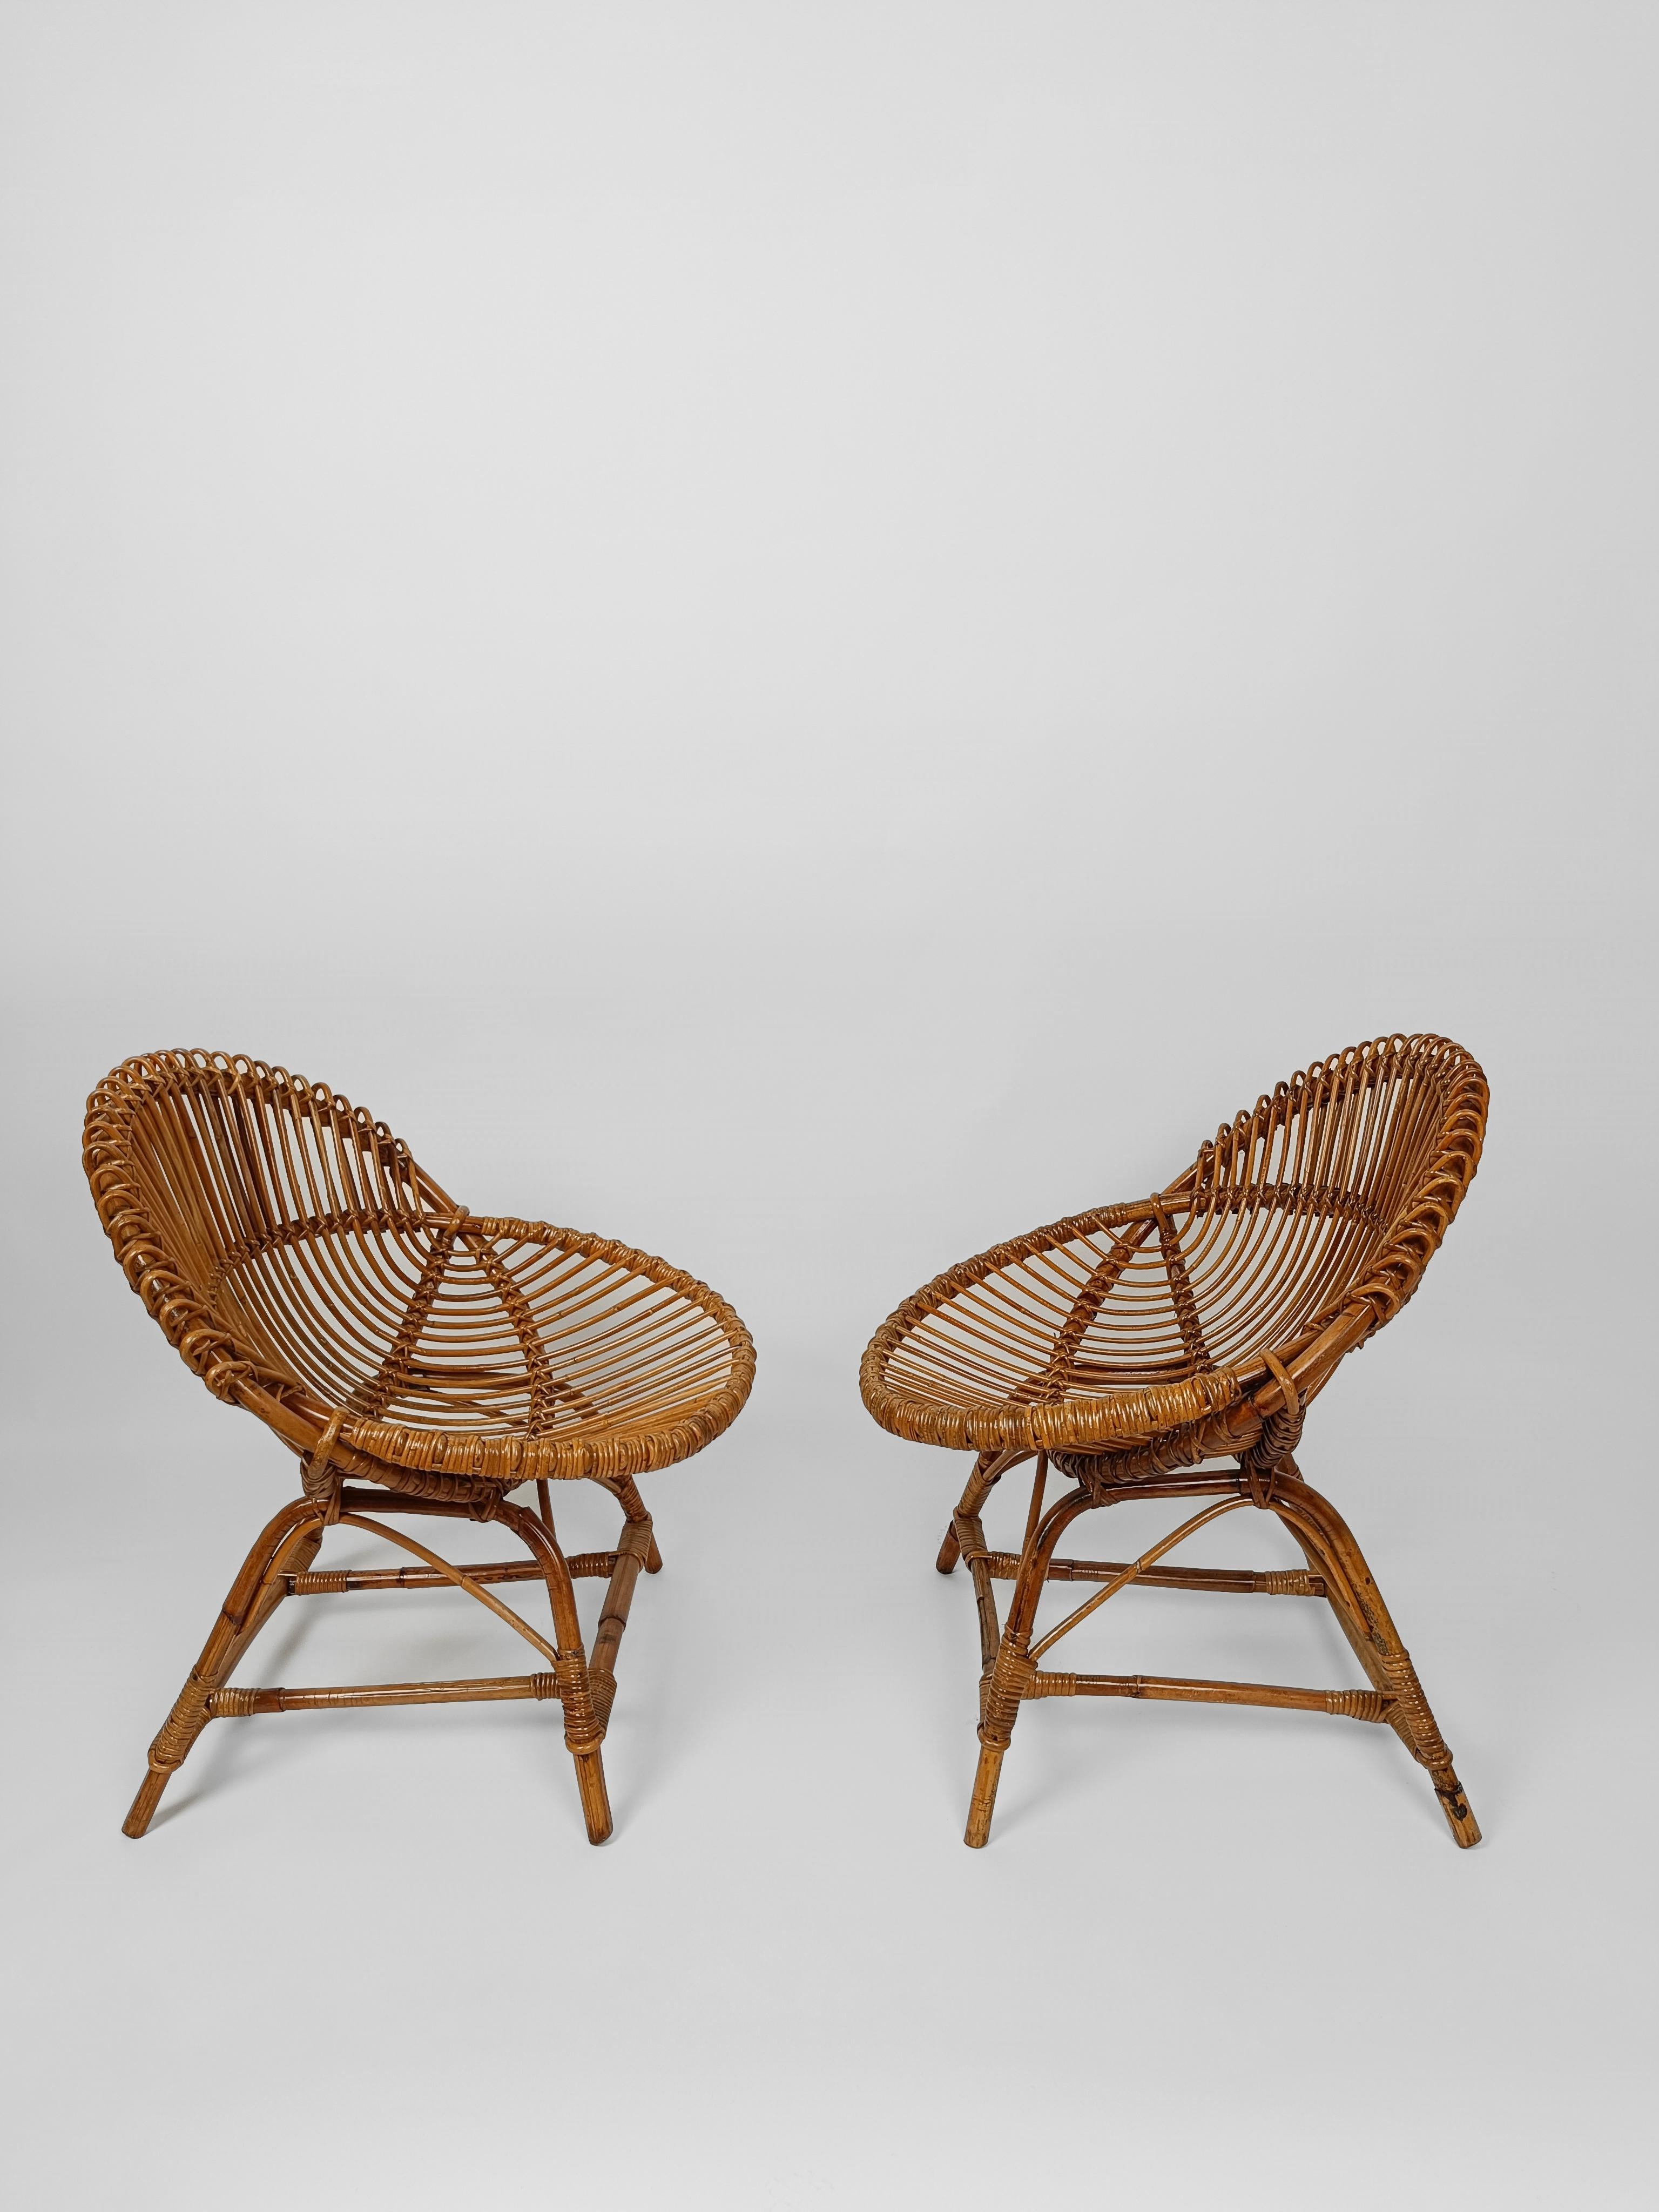 Vintage Cane and Rattan Set of 2 shell-shaped Armchairs with Coffe Table, 1960s For Sale 2